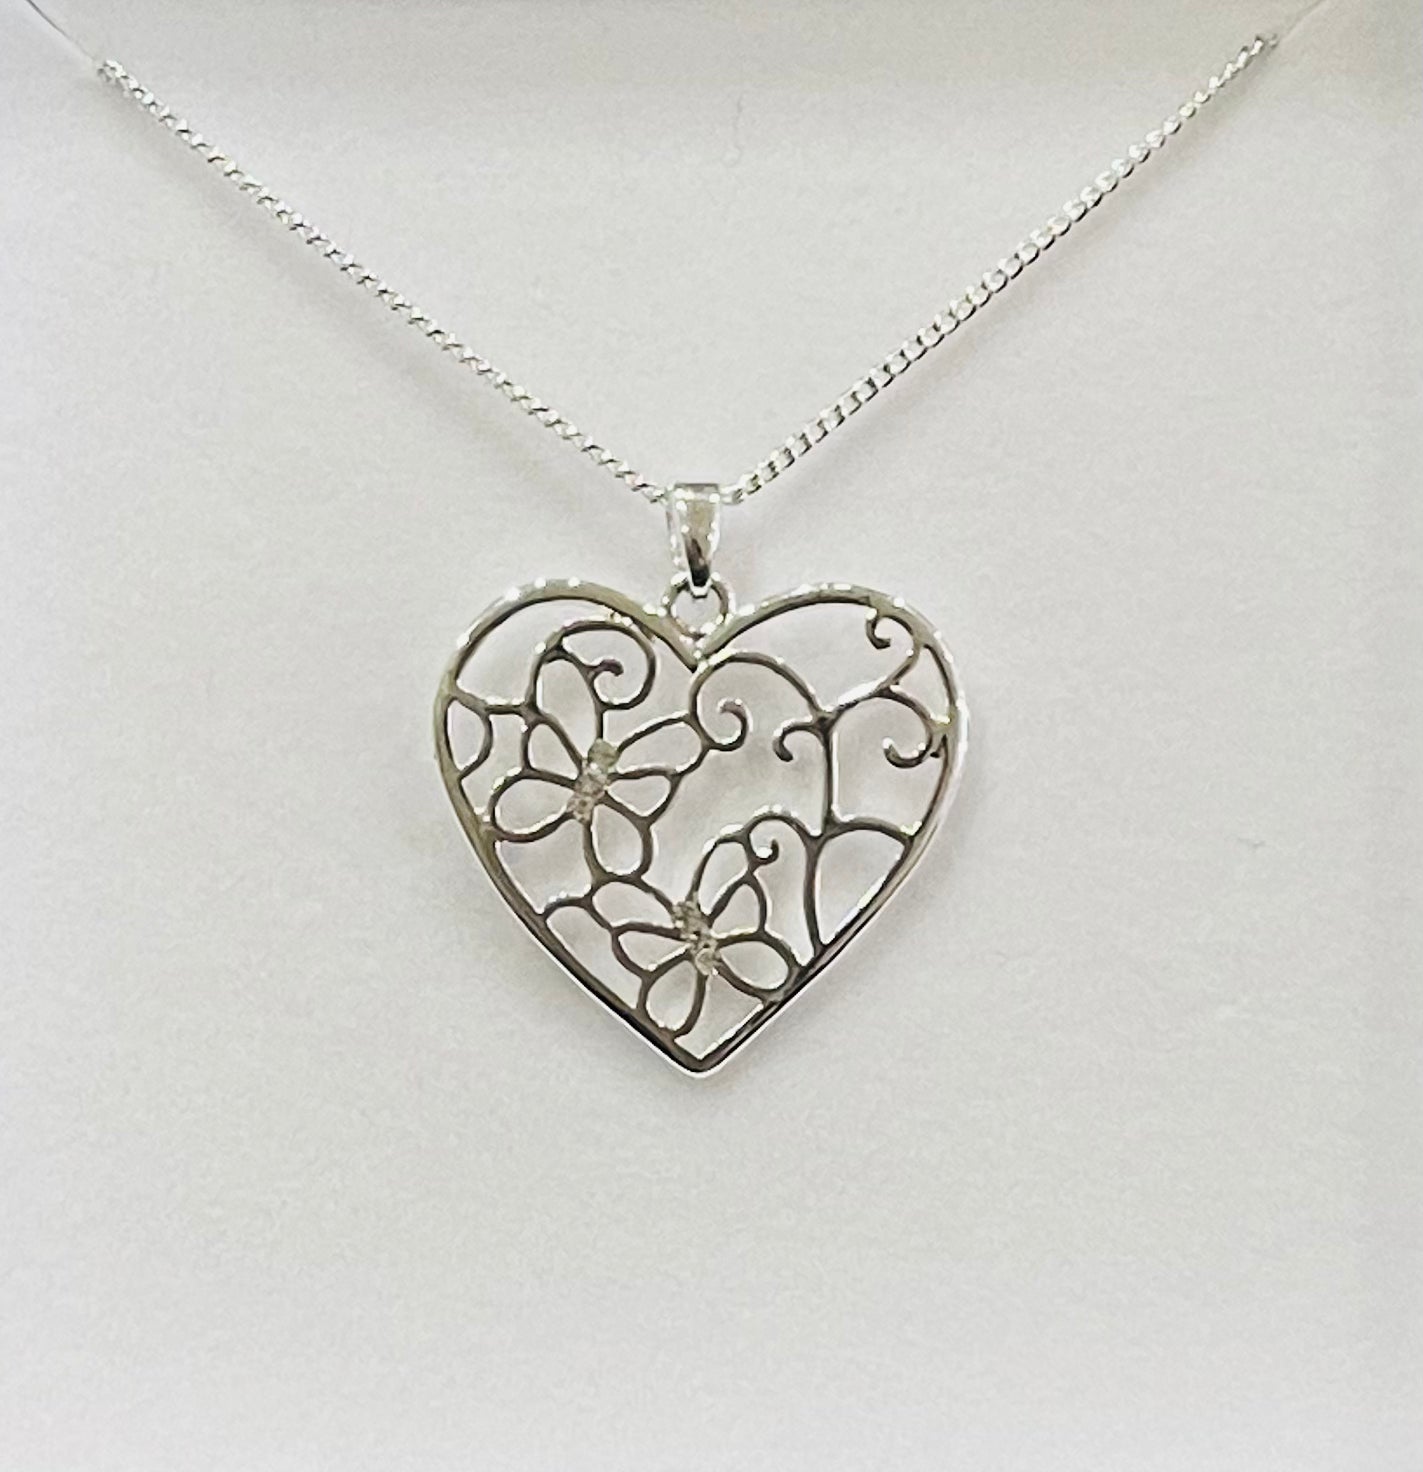 Silver Plated Filigree Heart Necklaces